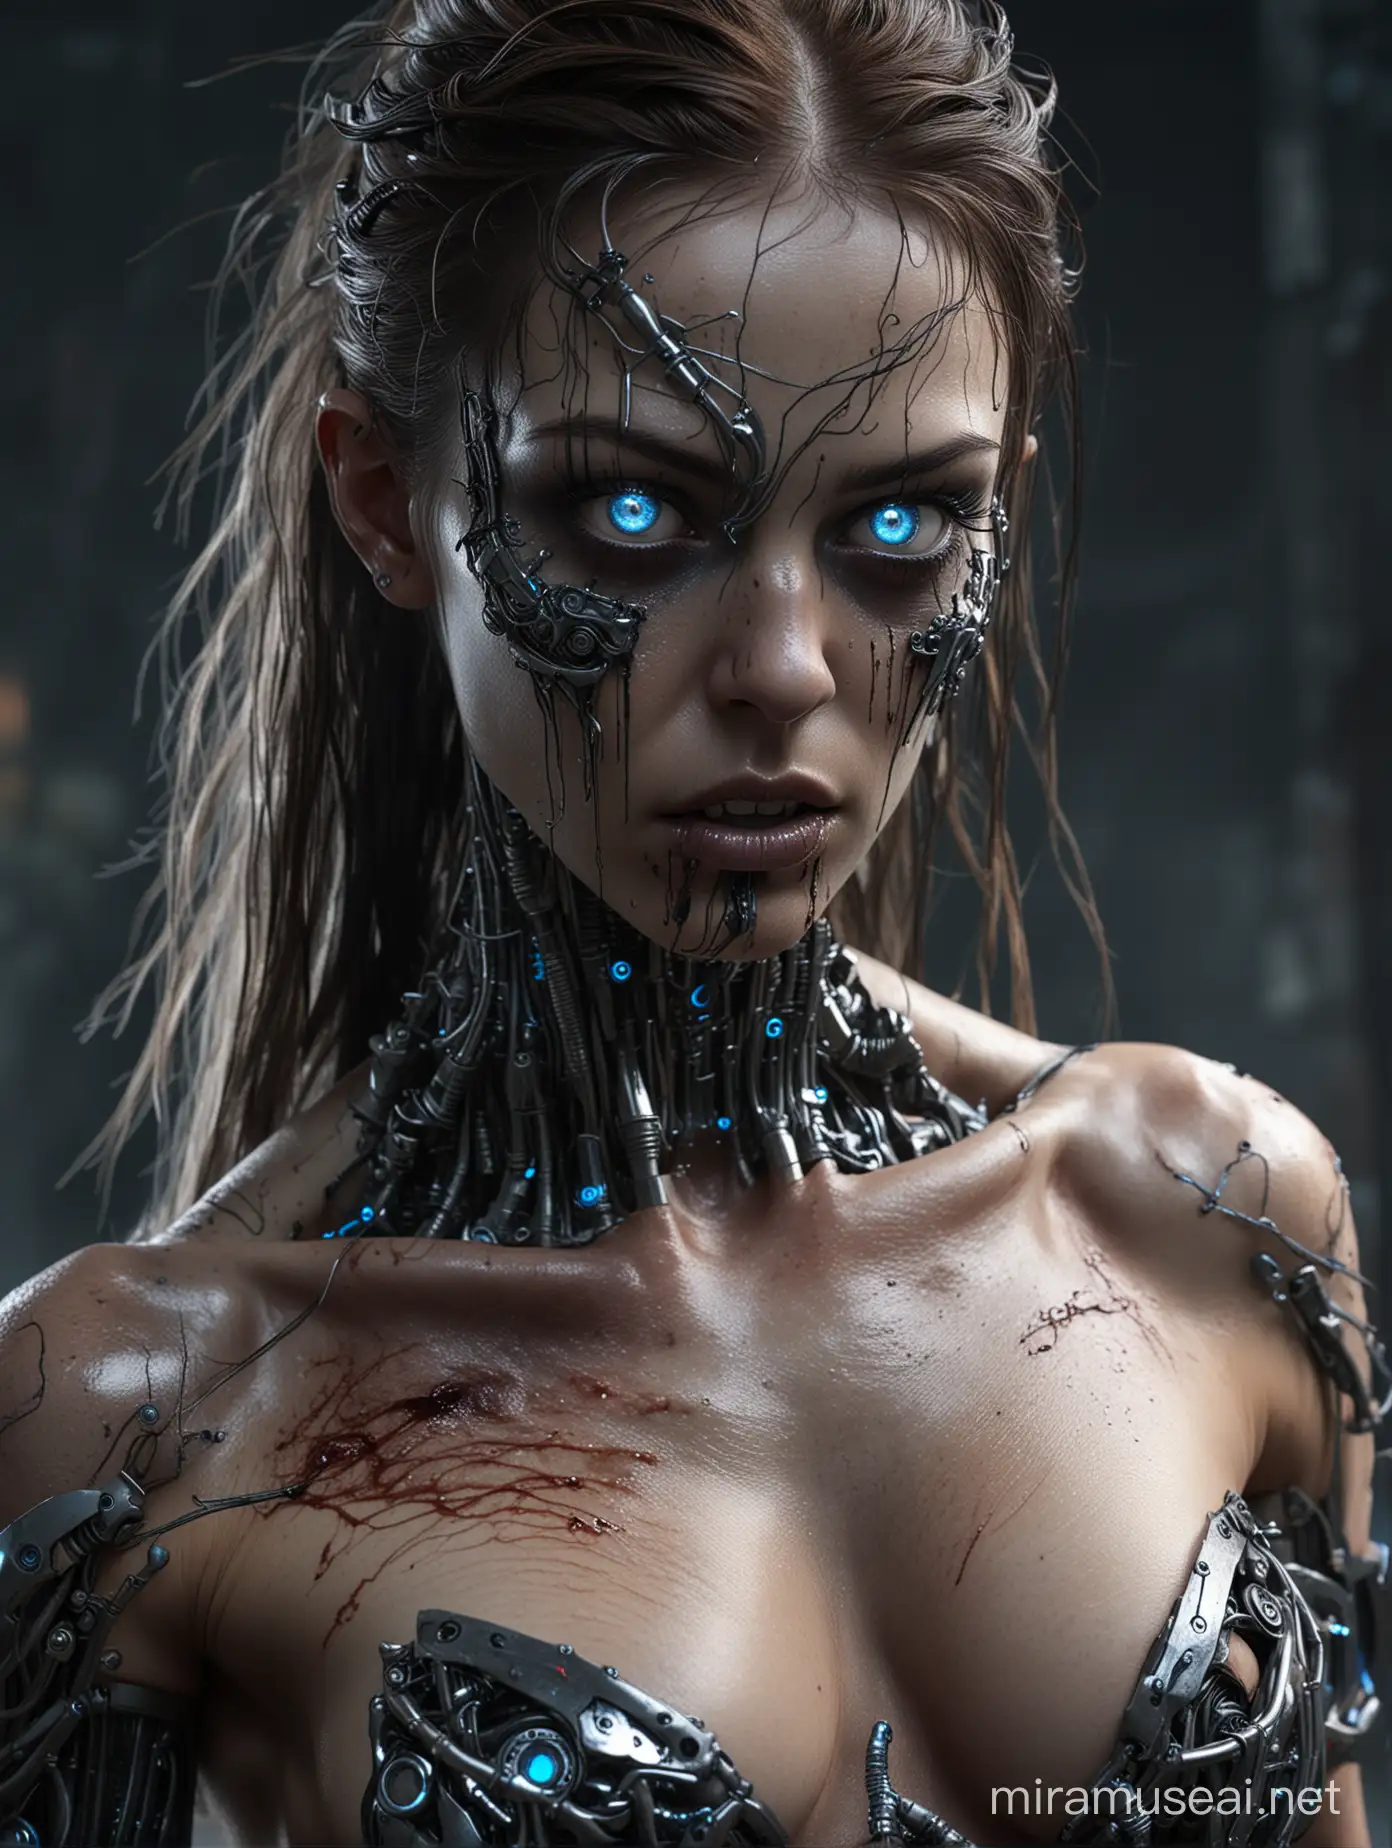 Futuristic Cybernetically Enhanced Female Zombie Gory Metallic Claws and Glowing Blue Eyes